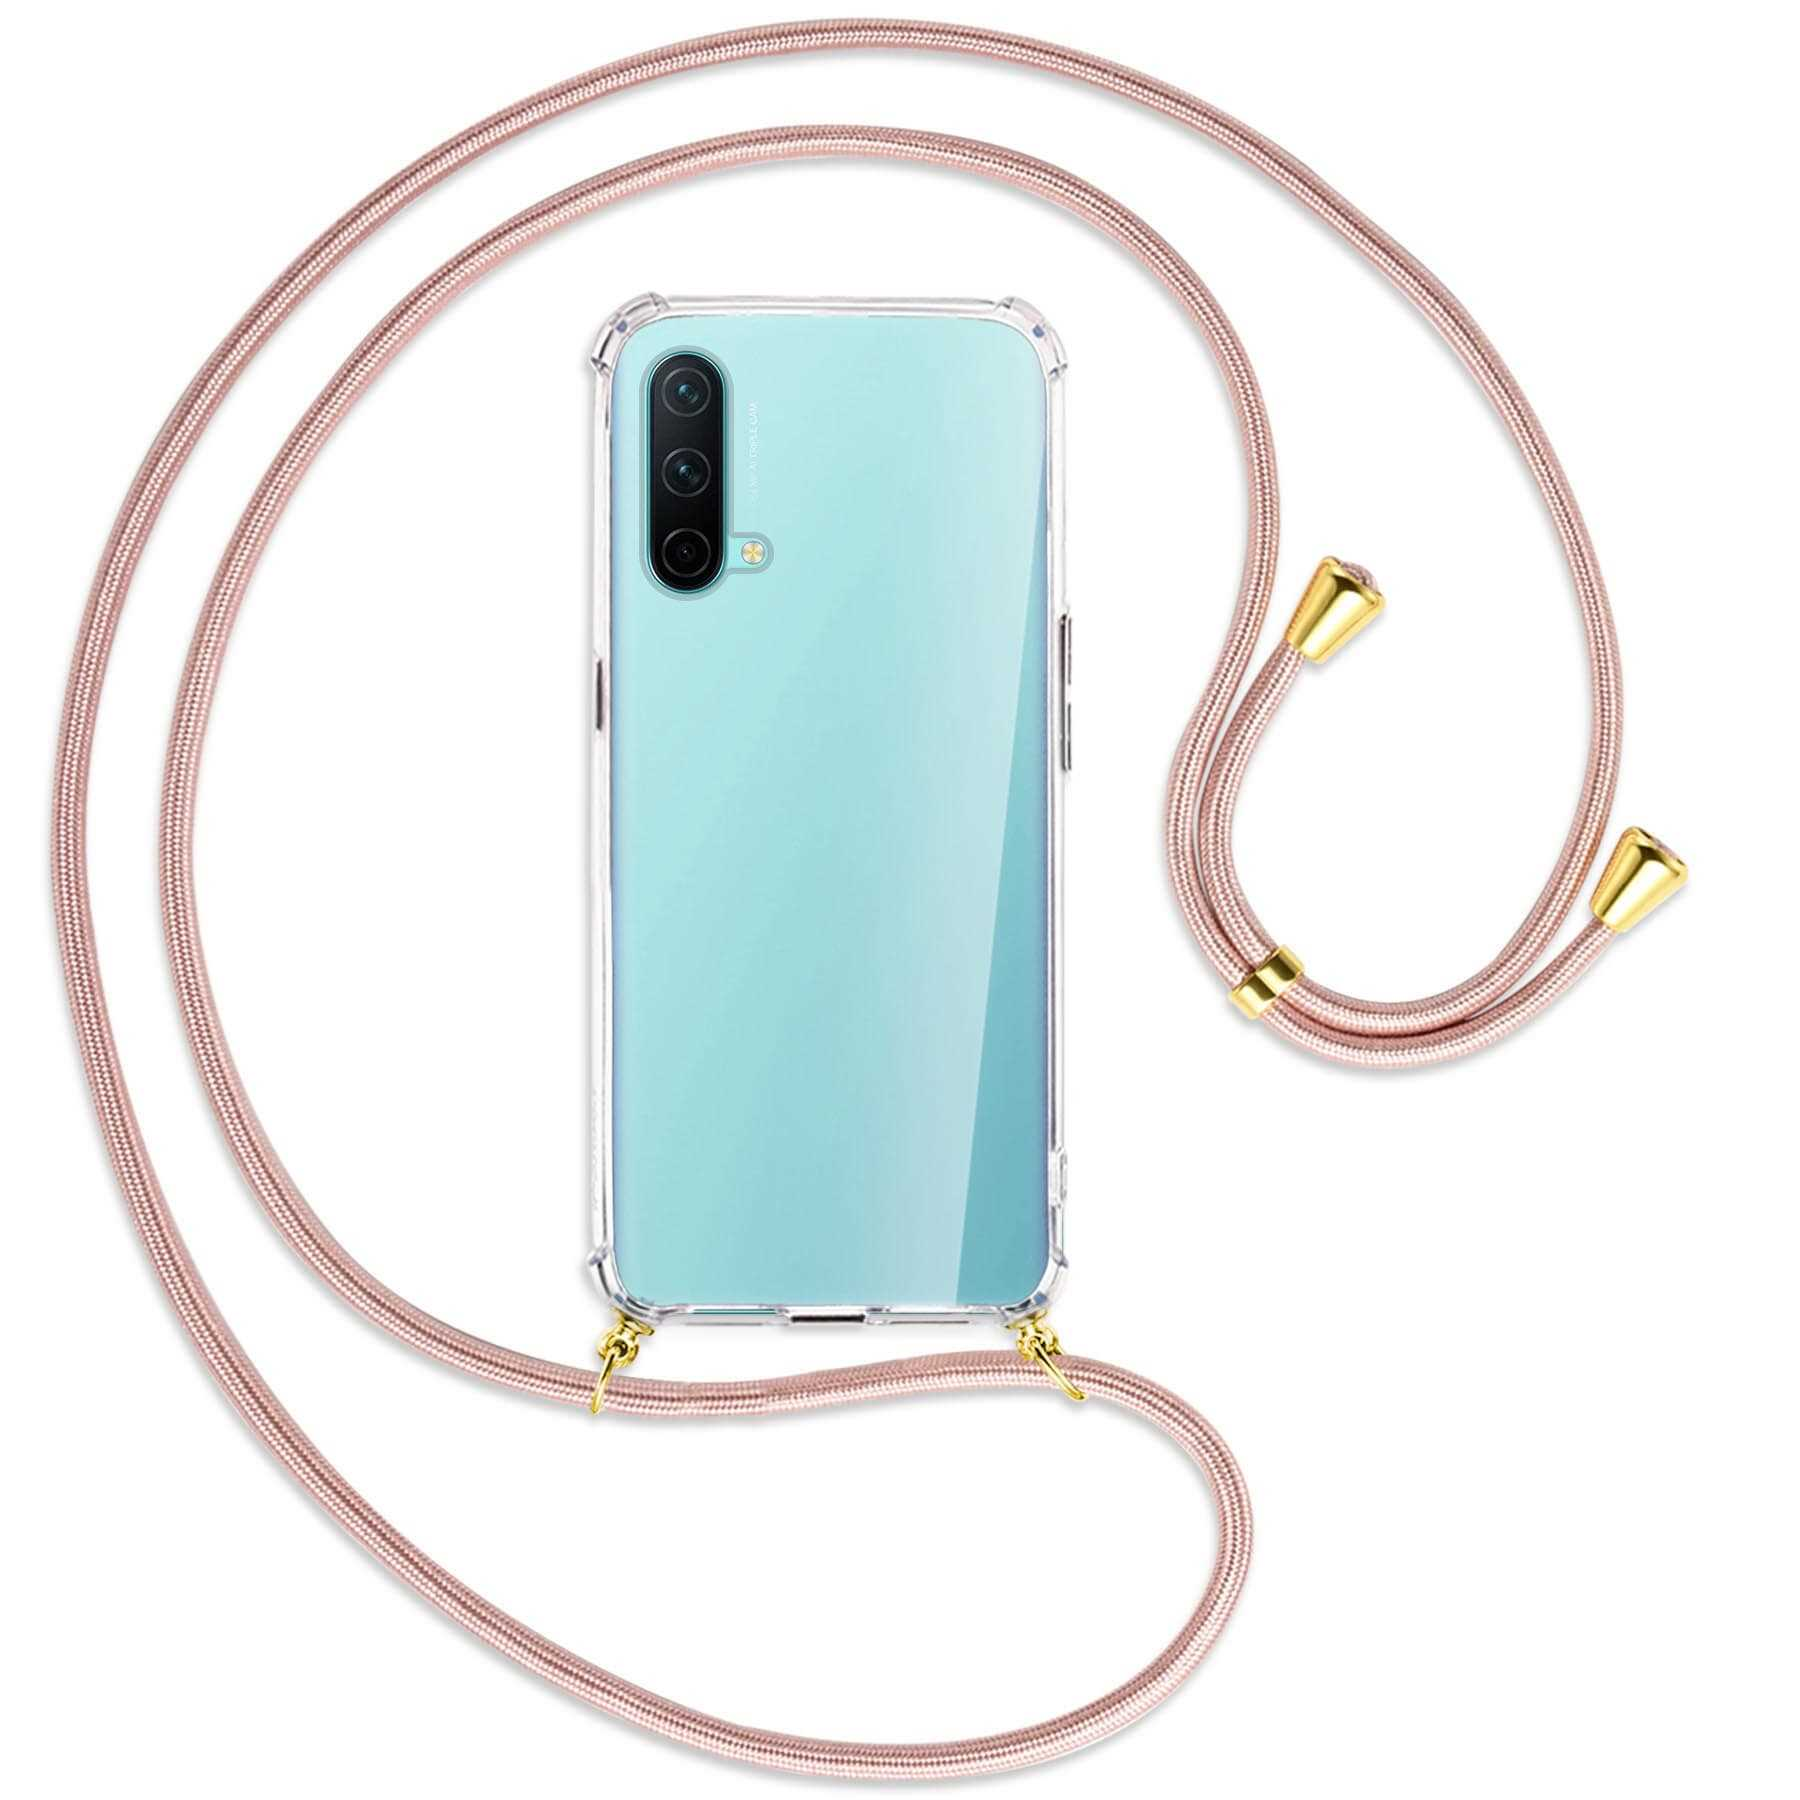 Backcover, / Rosegold MTB Umhänge-Hülle mit CE Nord Kordel, MORE Core OnePlus, Edition 5G, Gold ENERGY